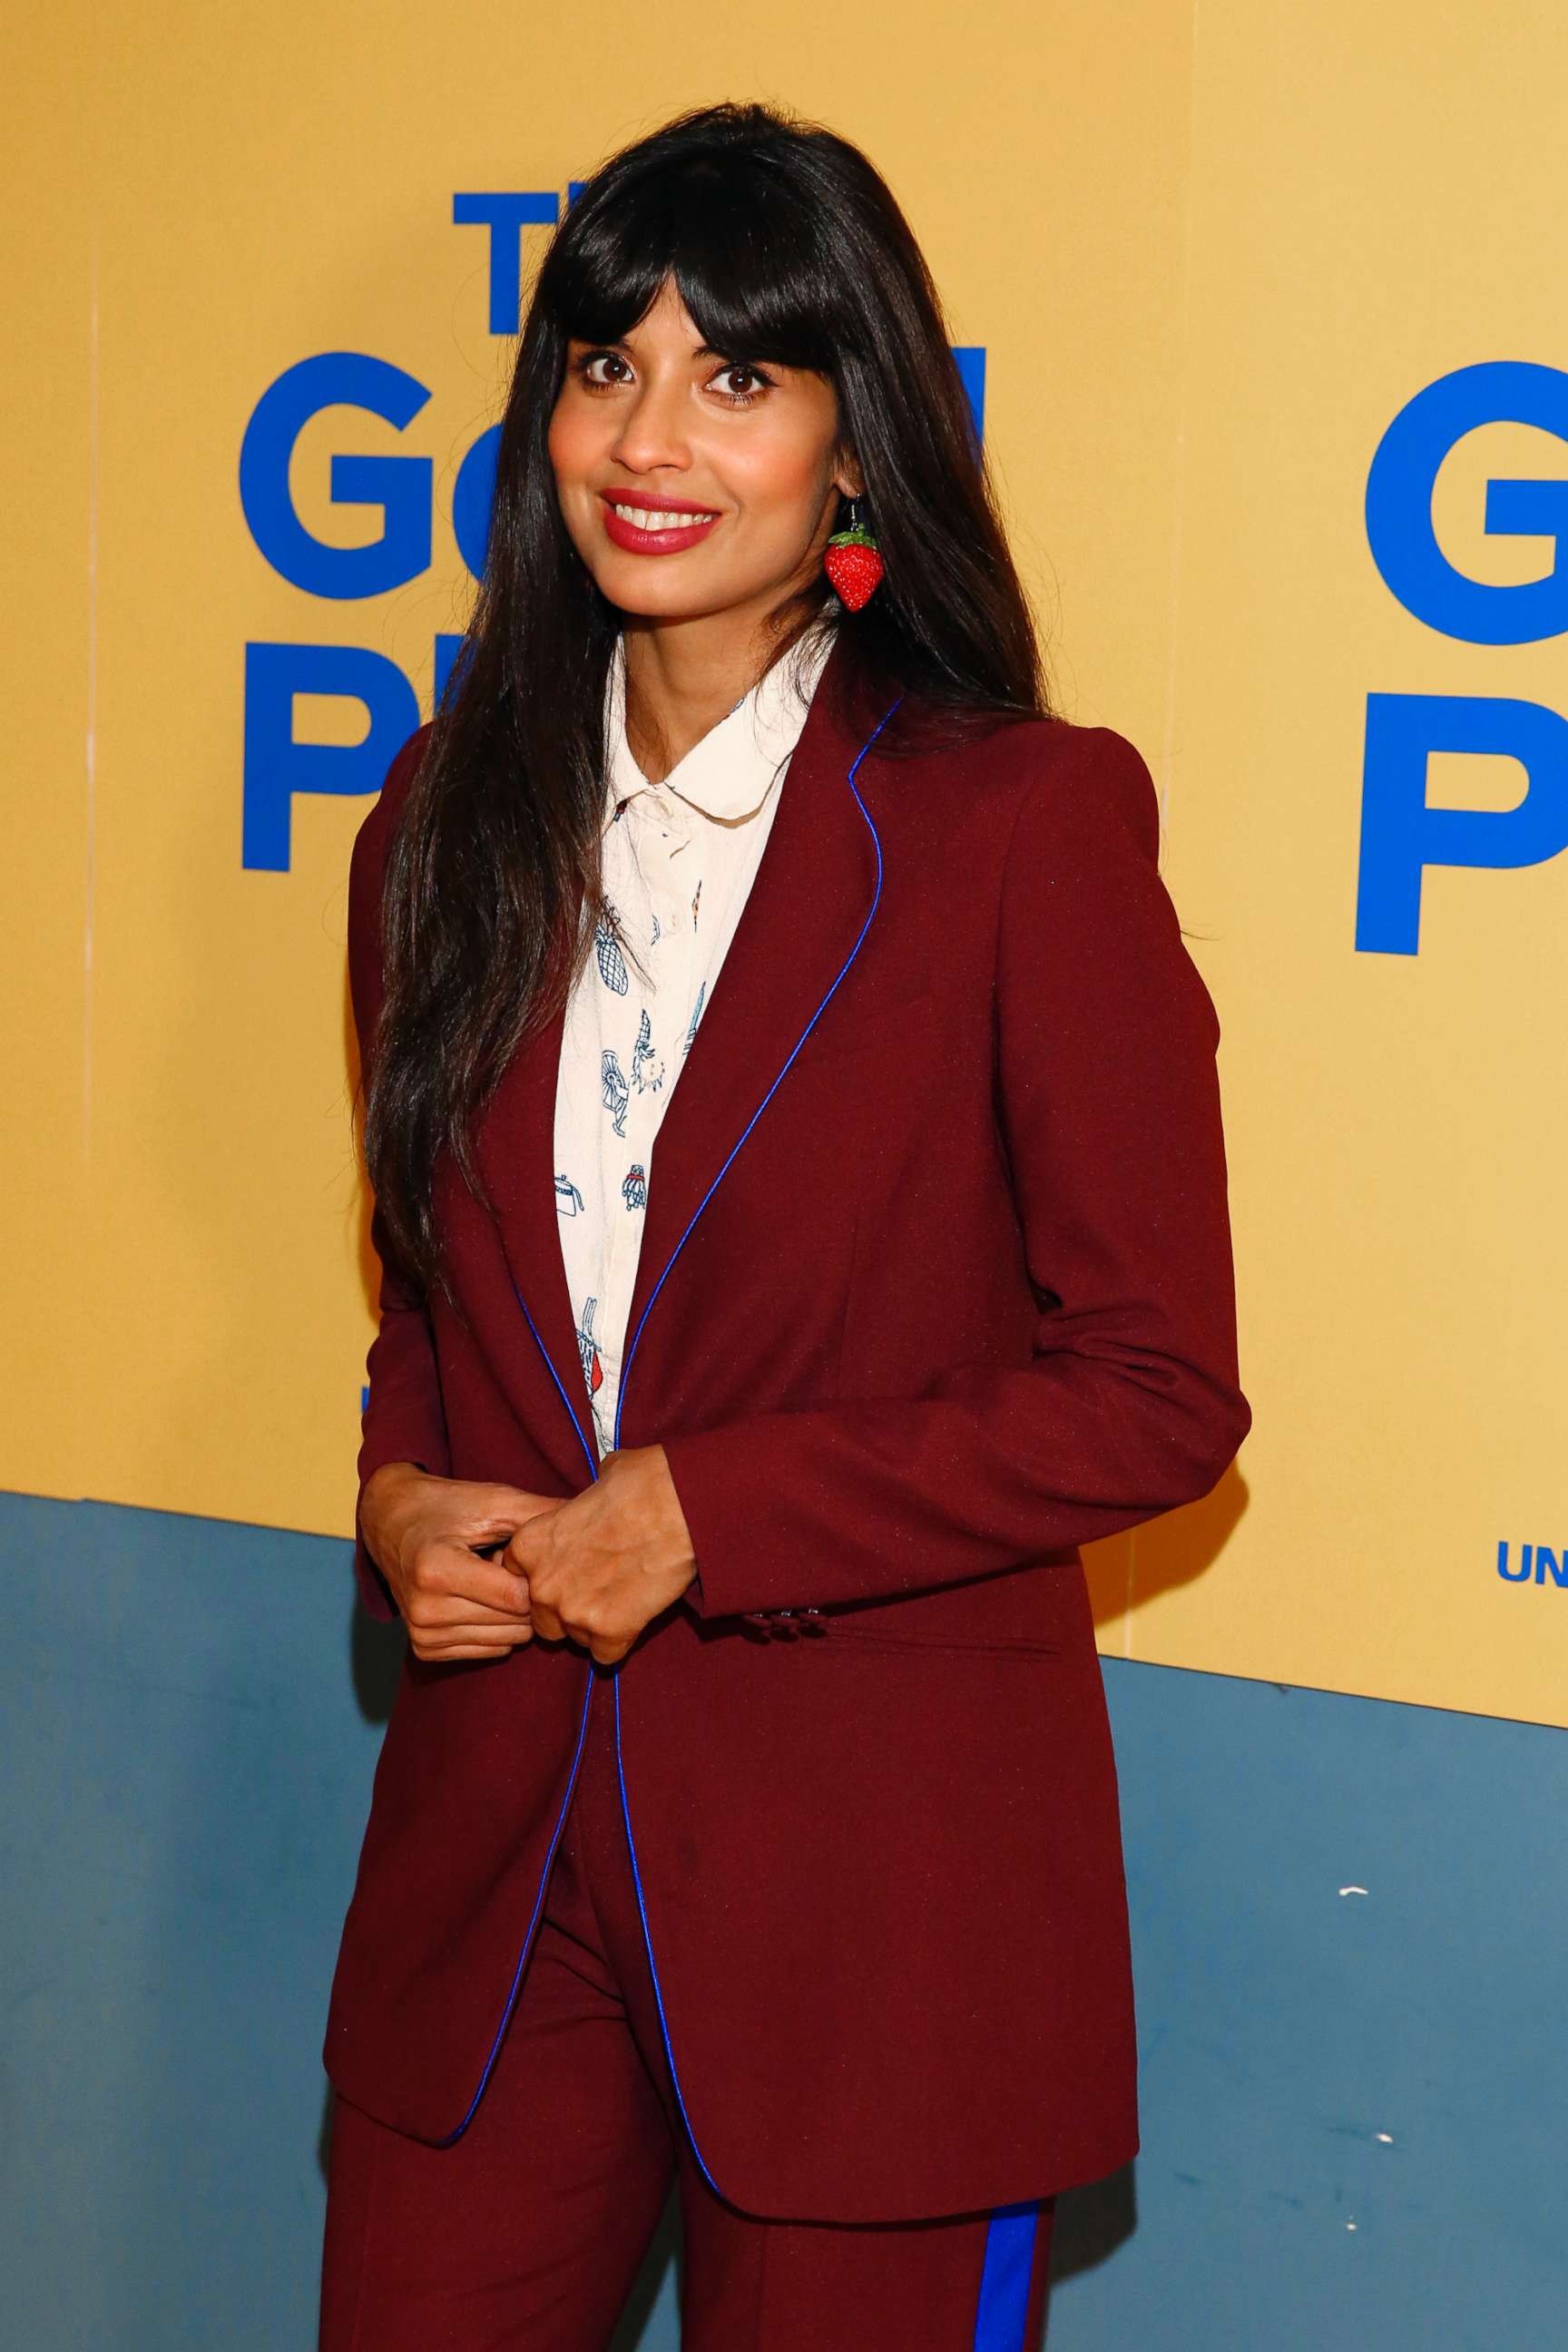 PHOTO: Jameela Jamil at UCB Sunset Theater in Los Angeles, June 19, 2018.